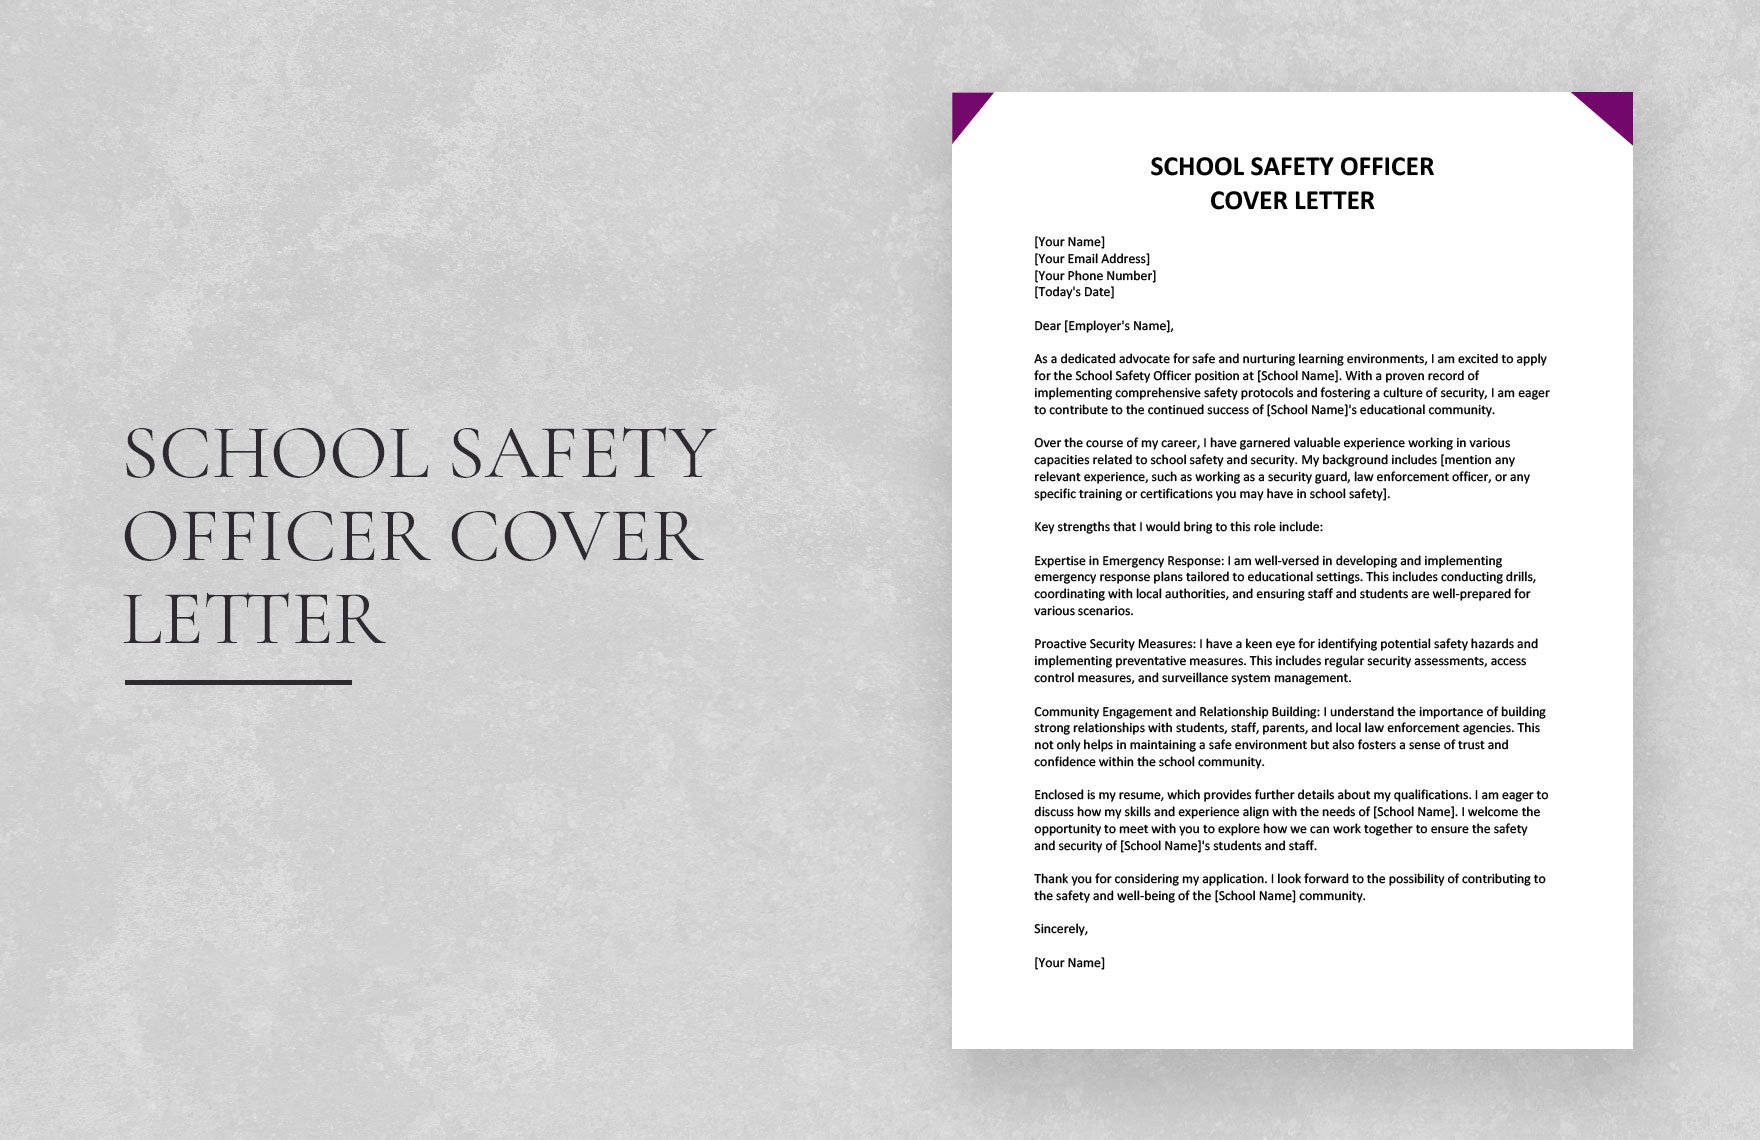 School Safety Officer Cover Letter